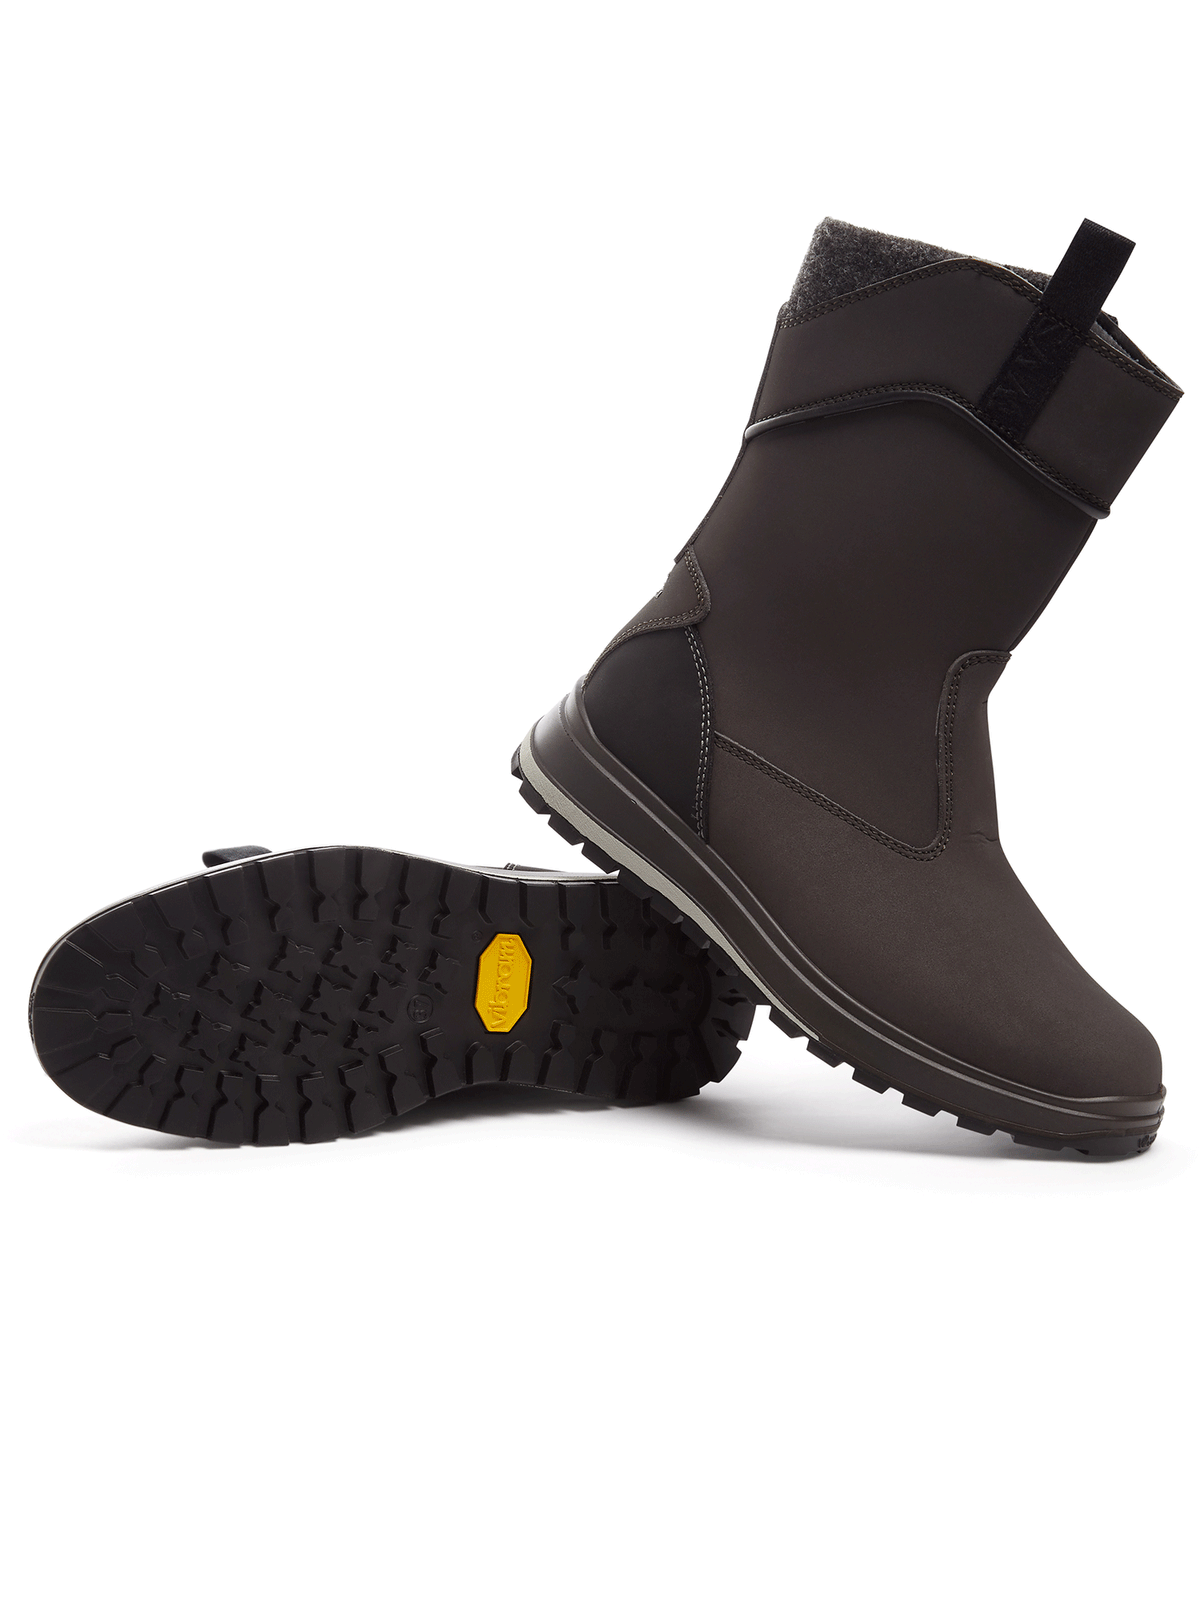 WVSport Country Boots | Women